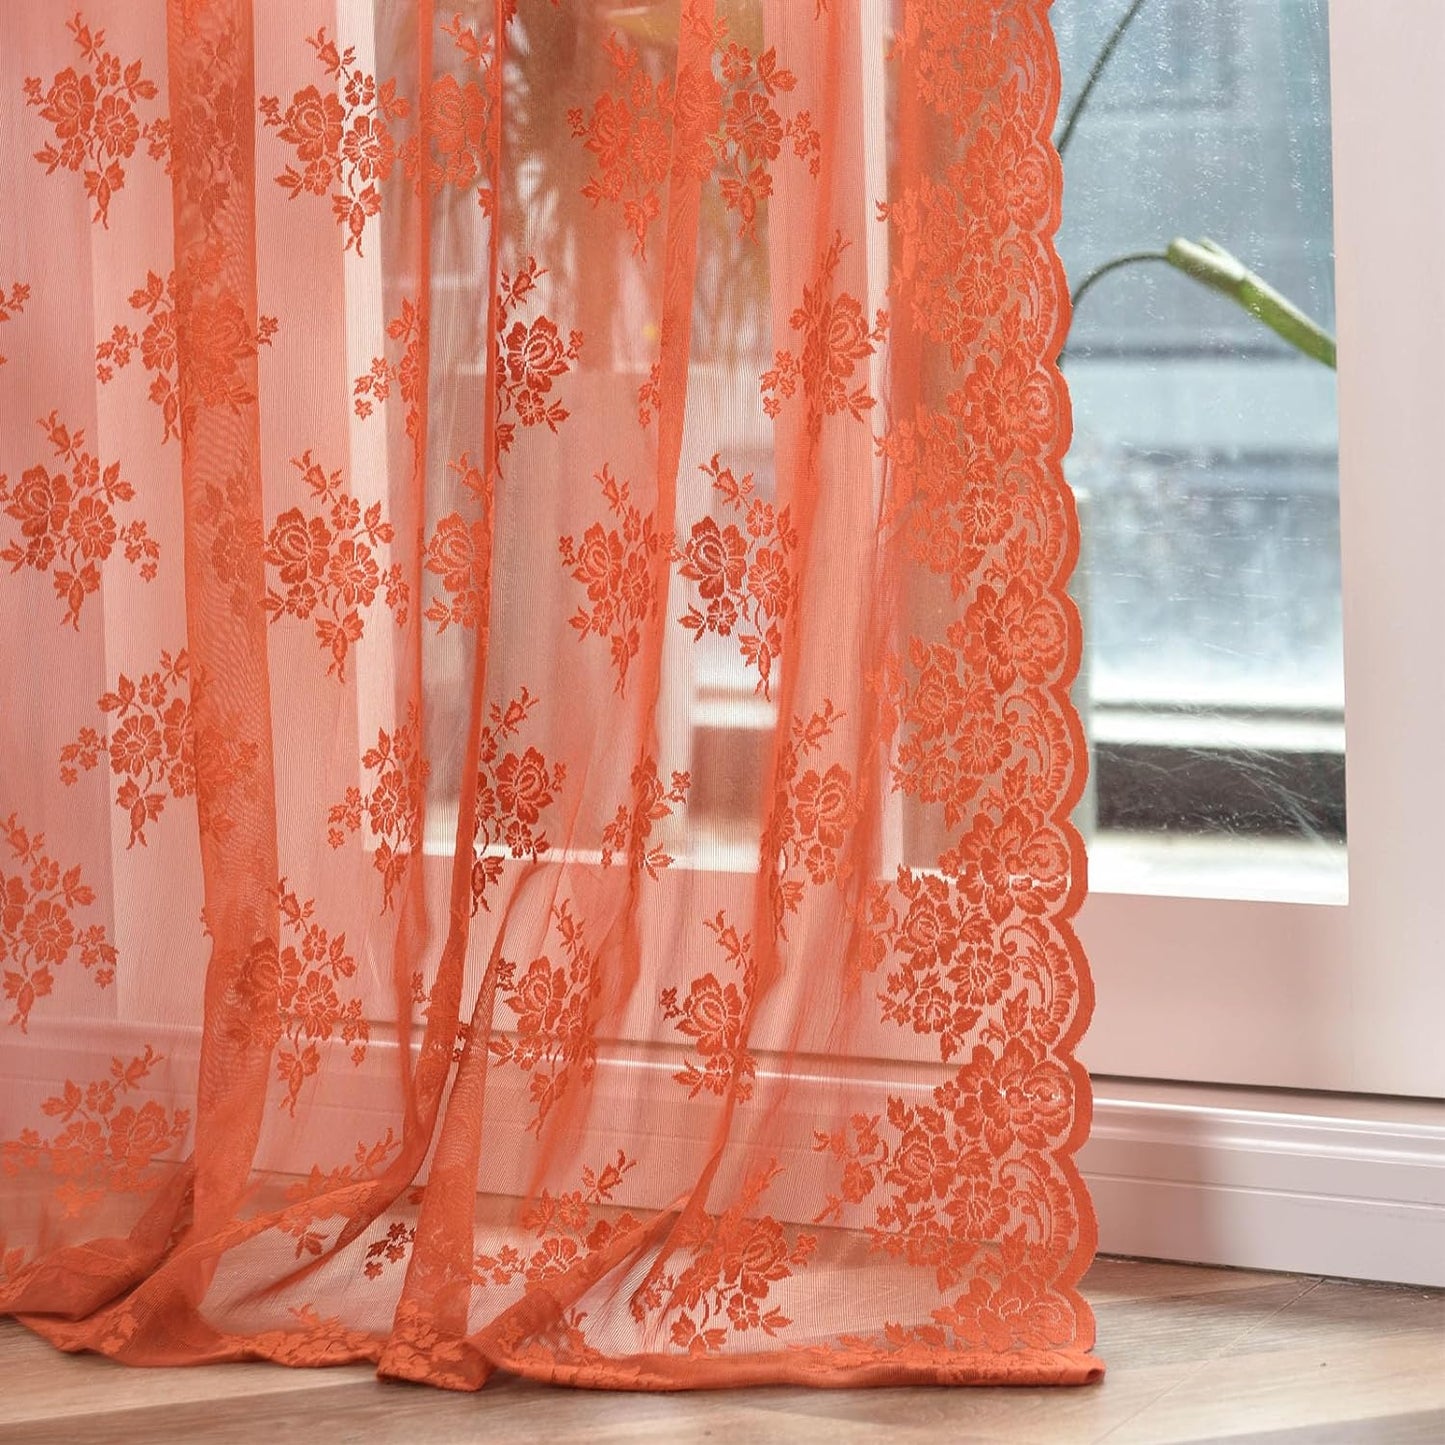 Kotile Sage Green Sheer Valance Curtain for Windows, Rustic Floral Spring Sheer Window Valance Curtain 18 Inch Length, Light Filtering Rod Pocket Lace Valance, 52 X 18 Inch, 1 Panel, Sage Green  Kotile Textile Burnt Orange 52 In X 54 In (W X L) 